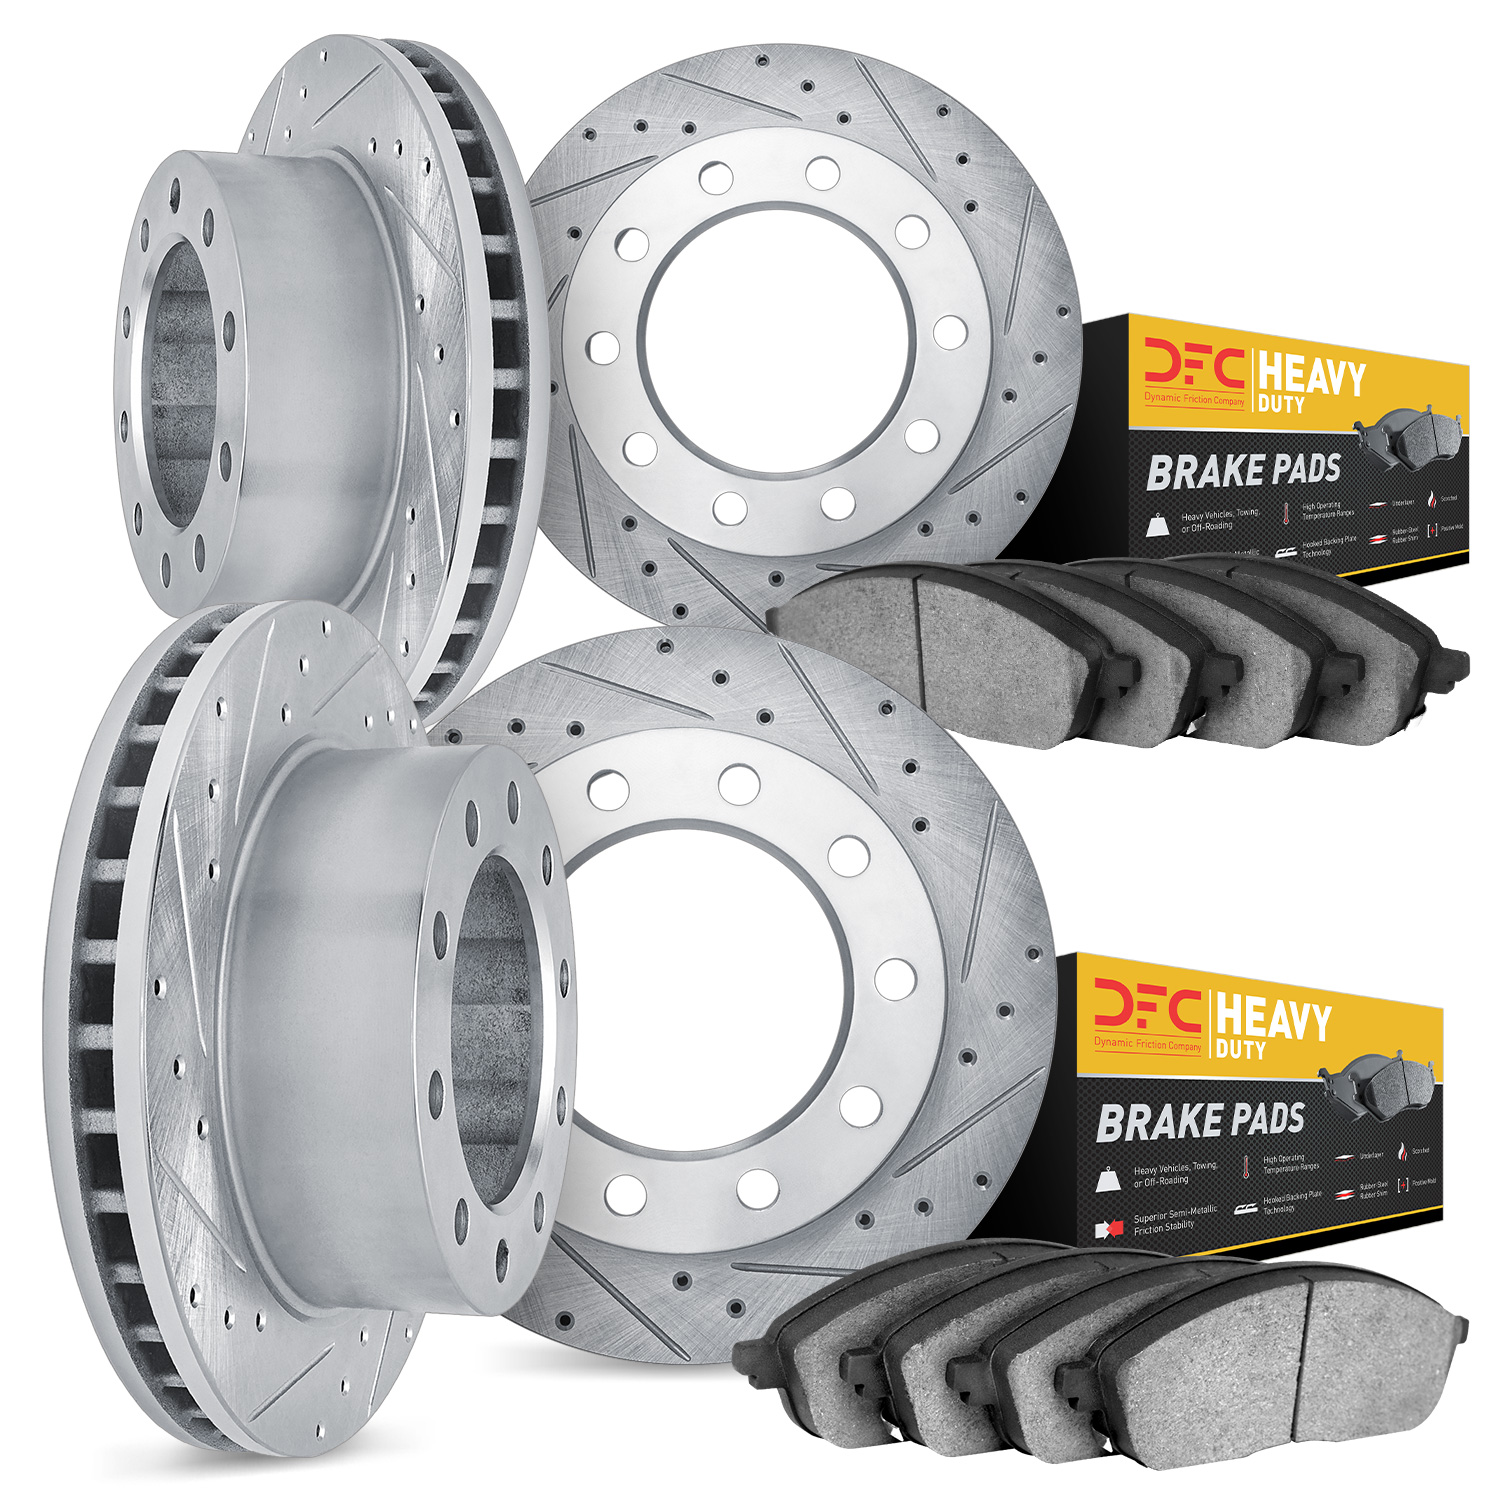 7204-99054 Drilled/Slotted Rotors w/Heavy-Duty Brake Pads Kit [Silver], 1999-2001 Ford/Lincoln/Mercury/Mazda, Position: Front an